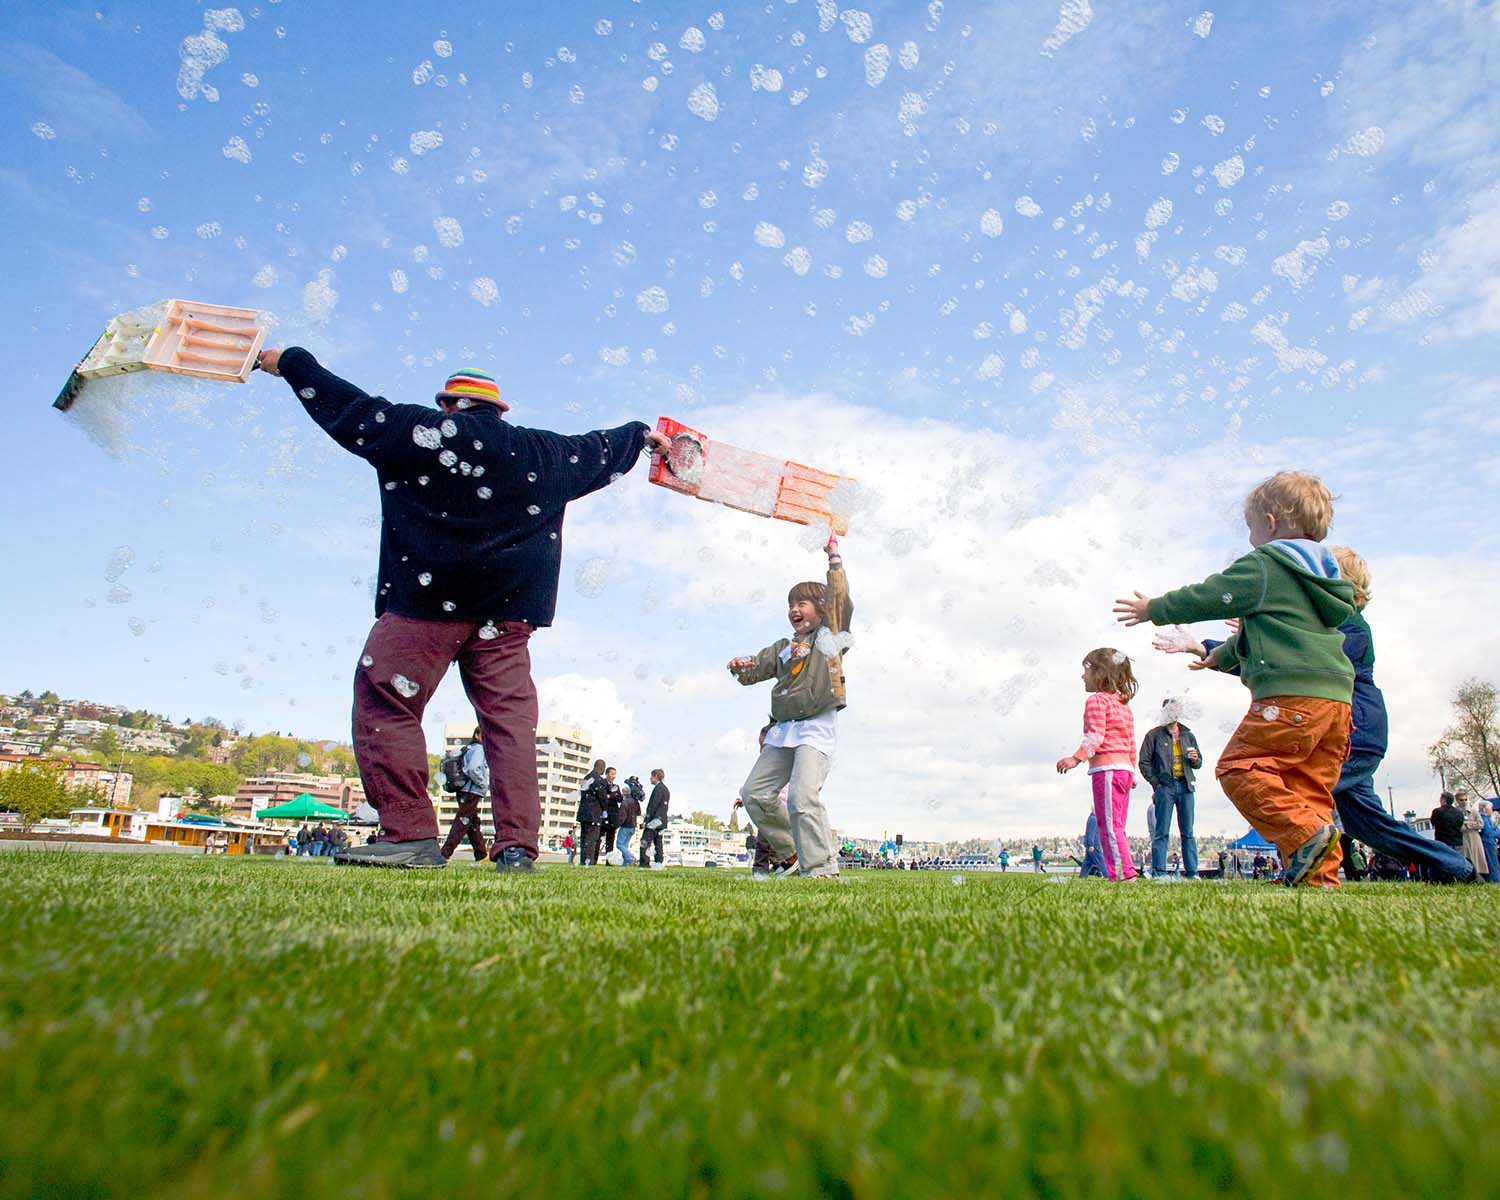 Adult and kids playing in park with bubbles